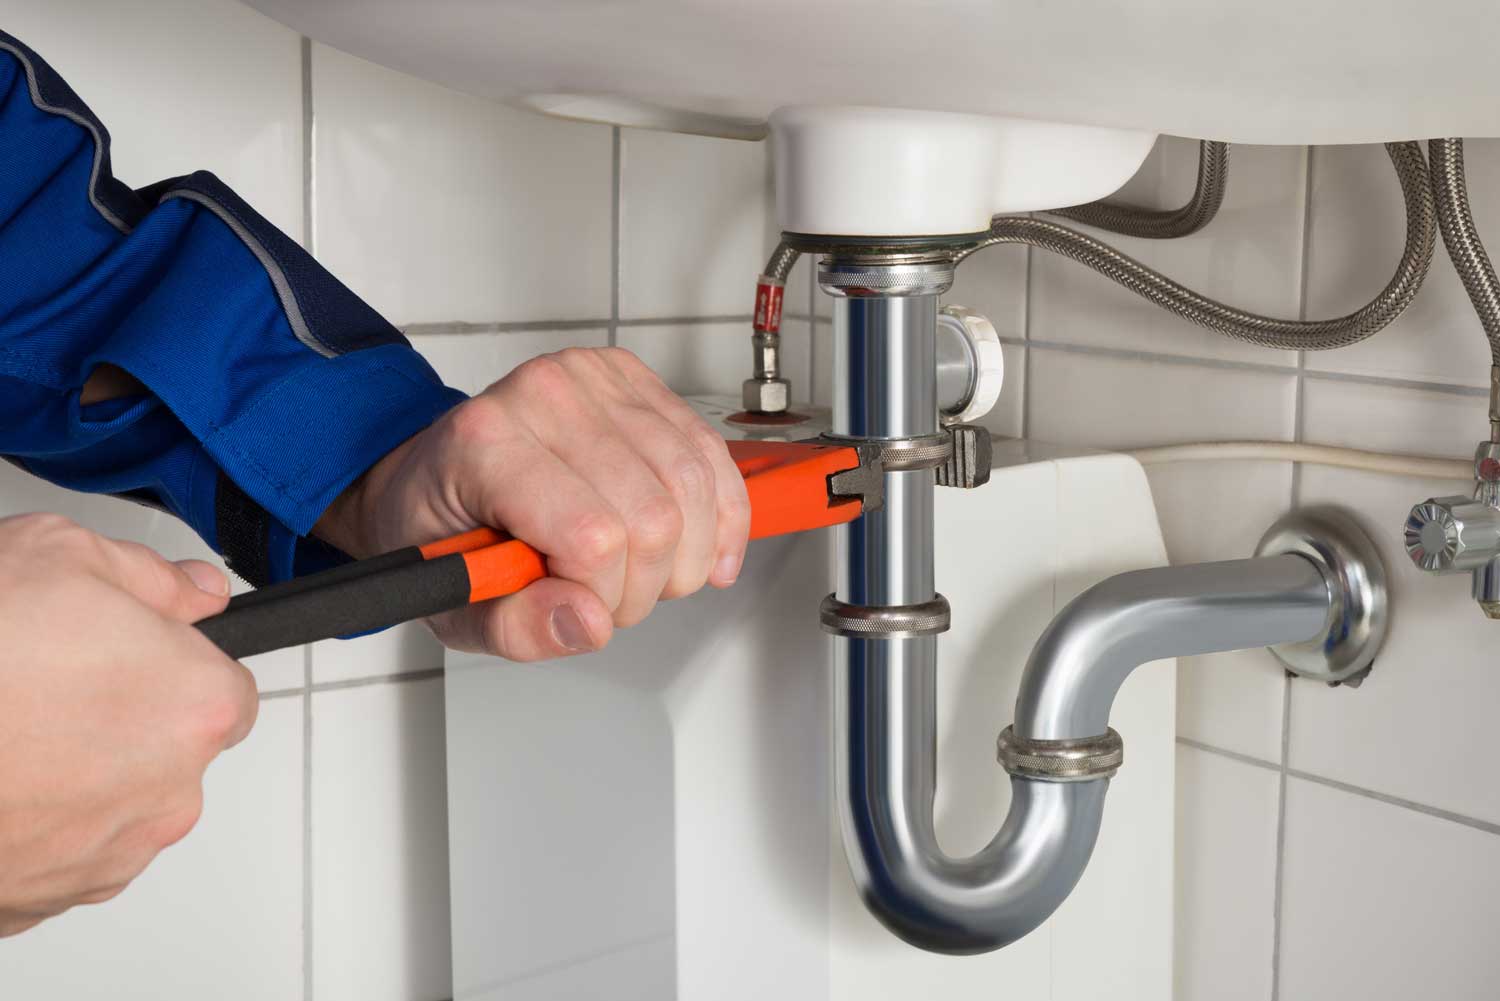 Plumber wearing a blue uniform uses an orange-handled wrench to tighten a pipe under a white ceramic sink in a tiled bathroom. The focus is on the hands working on the plumbing connections, highlighting the tools and metallic pipes.